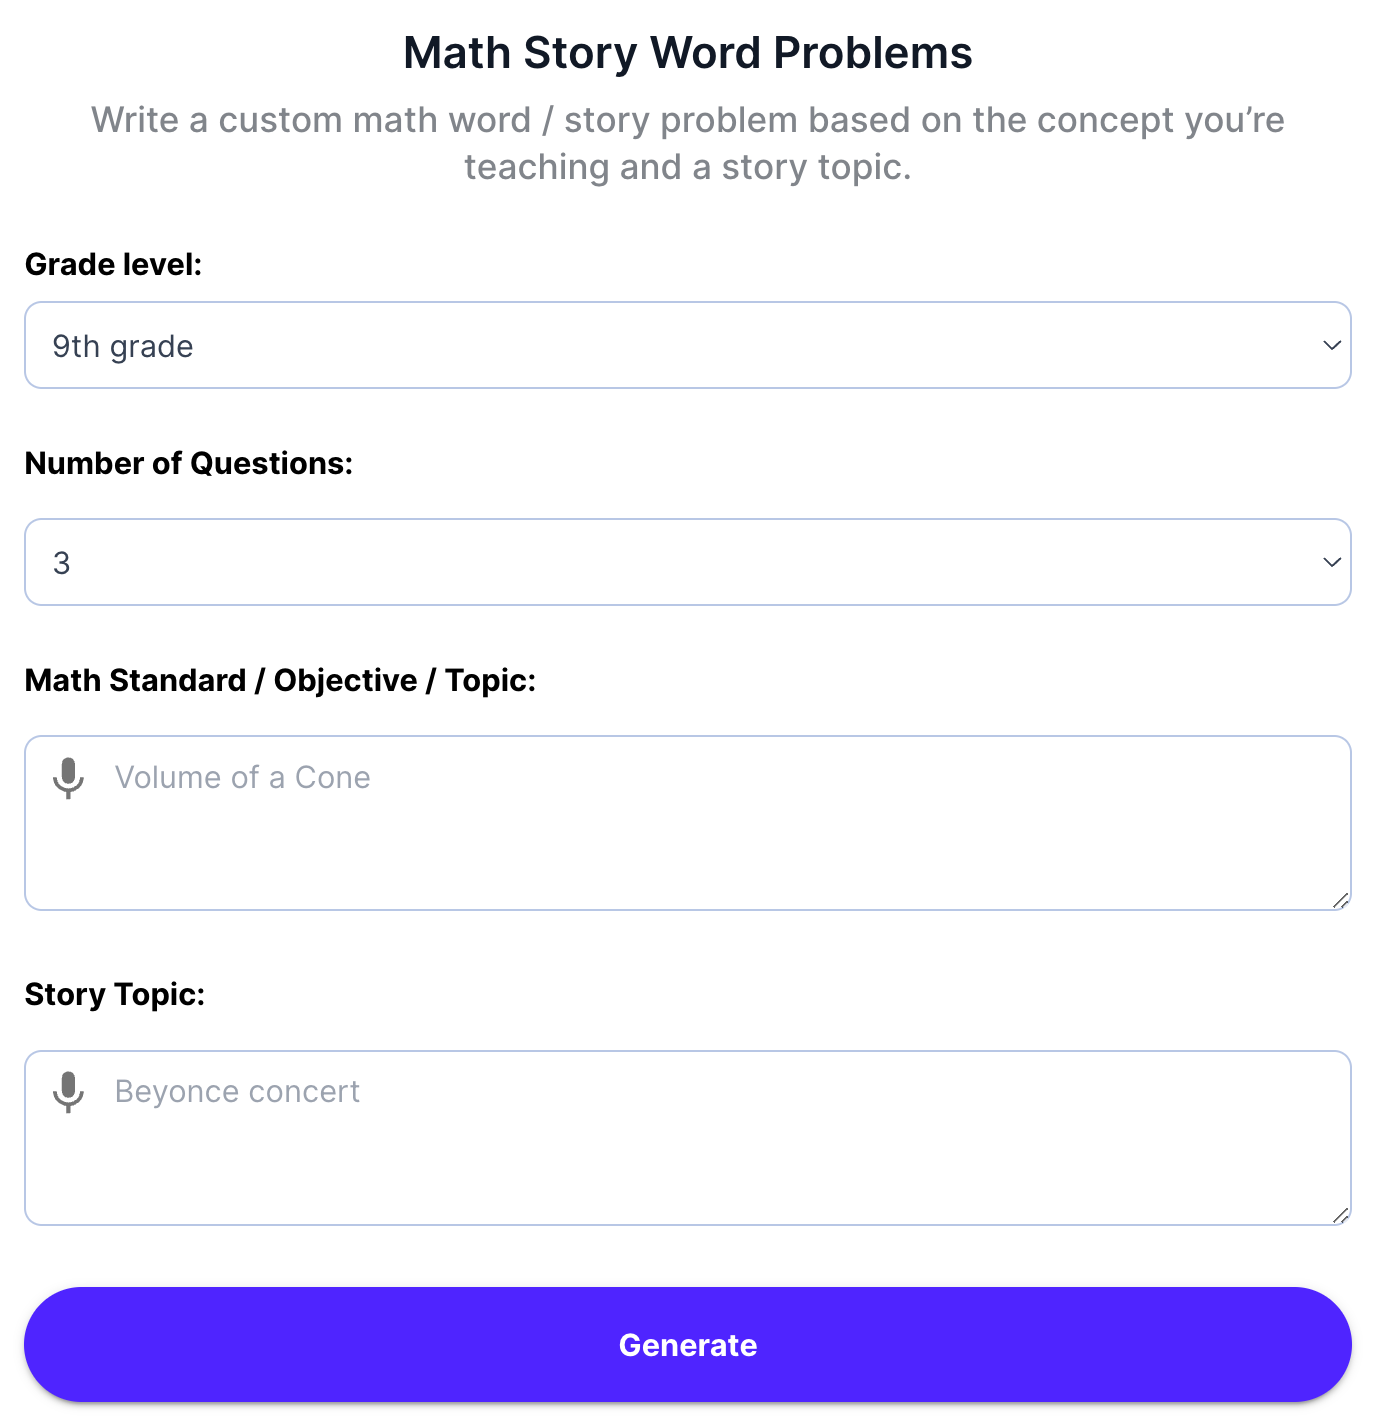 A Math Story Word problem generator that takes grade level and number of questions and topic and story topic and generates a worksheet.